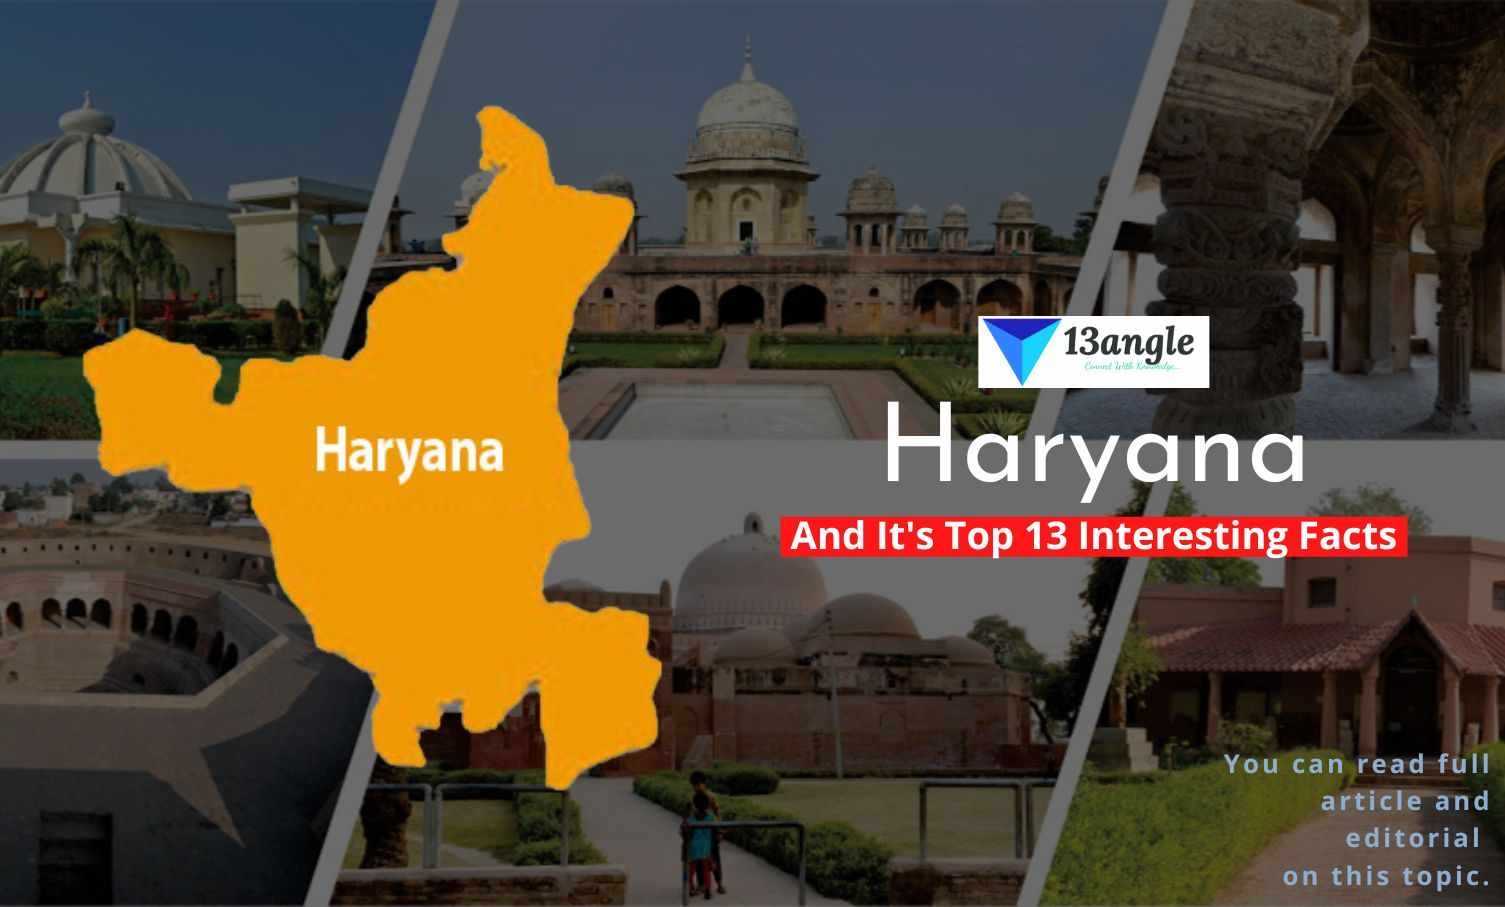 Haryana And It's Top 13 Interesting Facts- 13angle.com